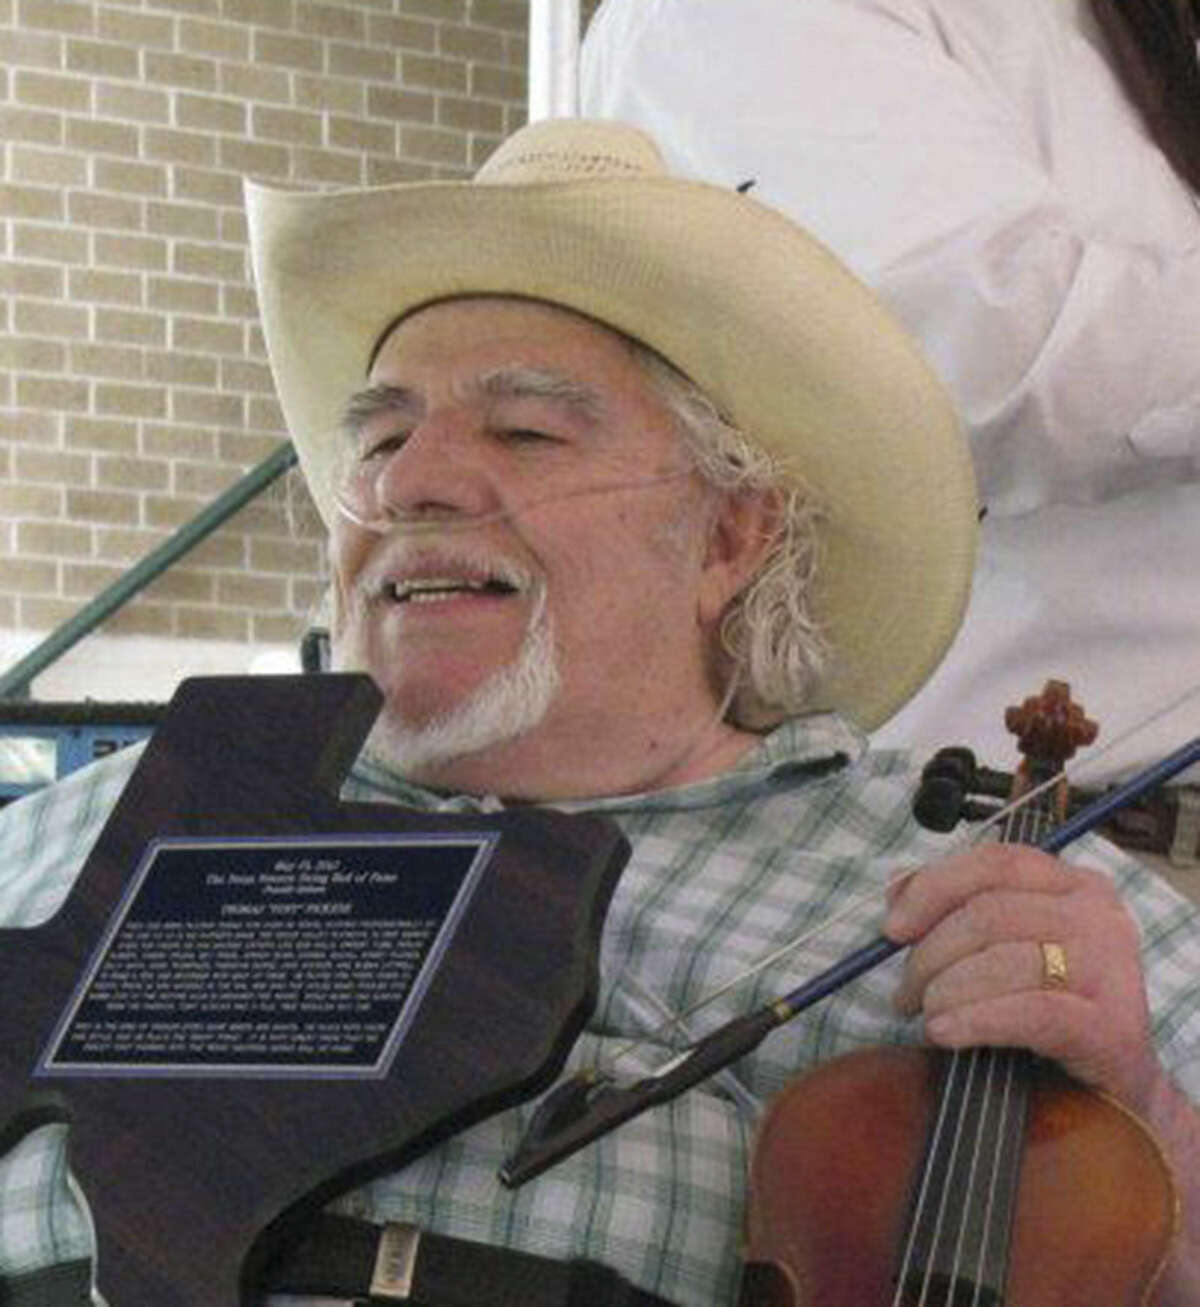 Thomas “Tony” Autry Pickens began playing the fiddle when he was 10 years old.